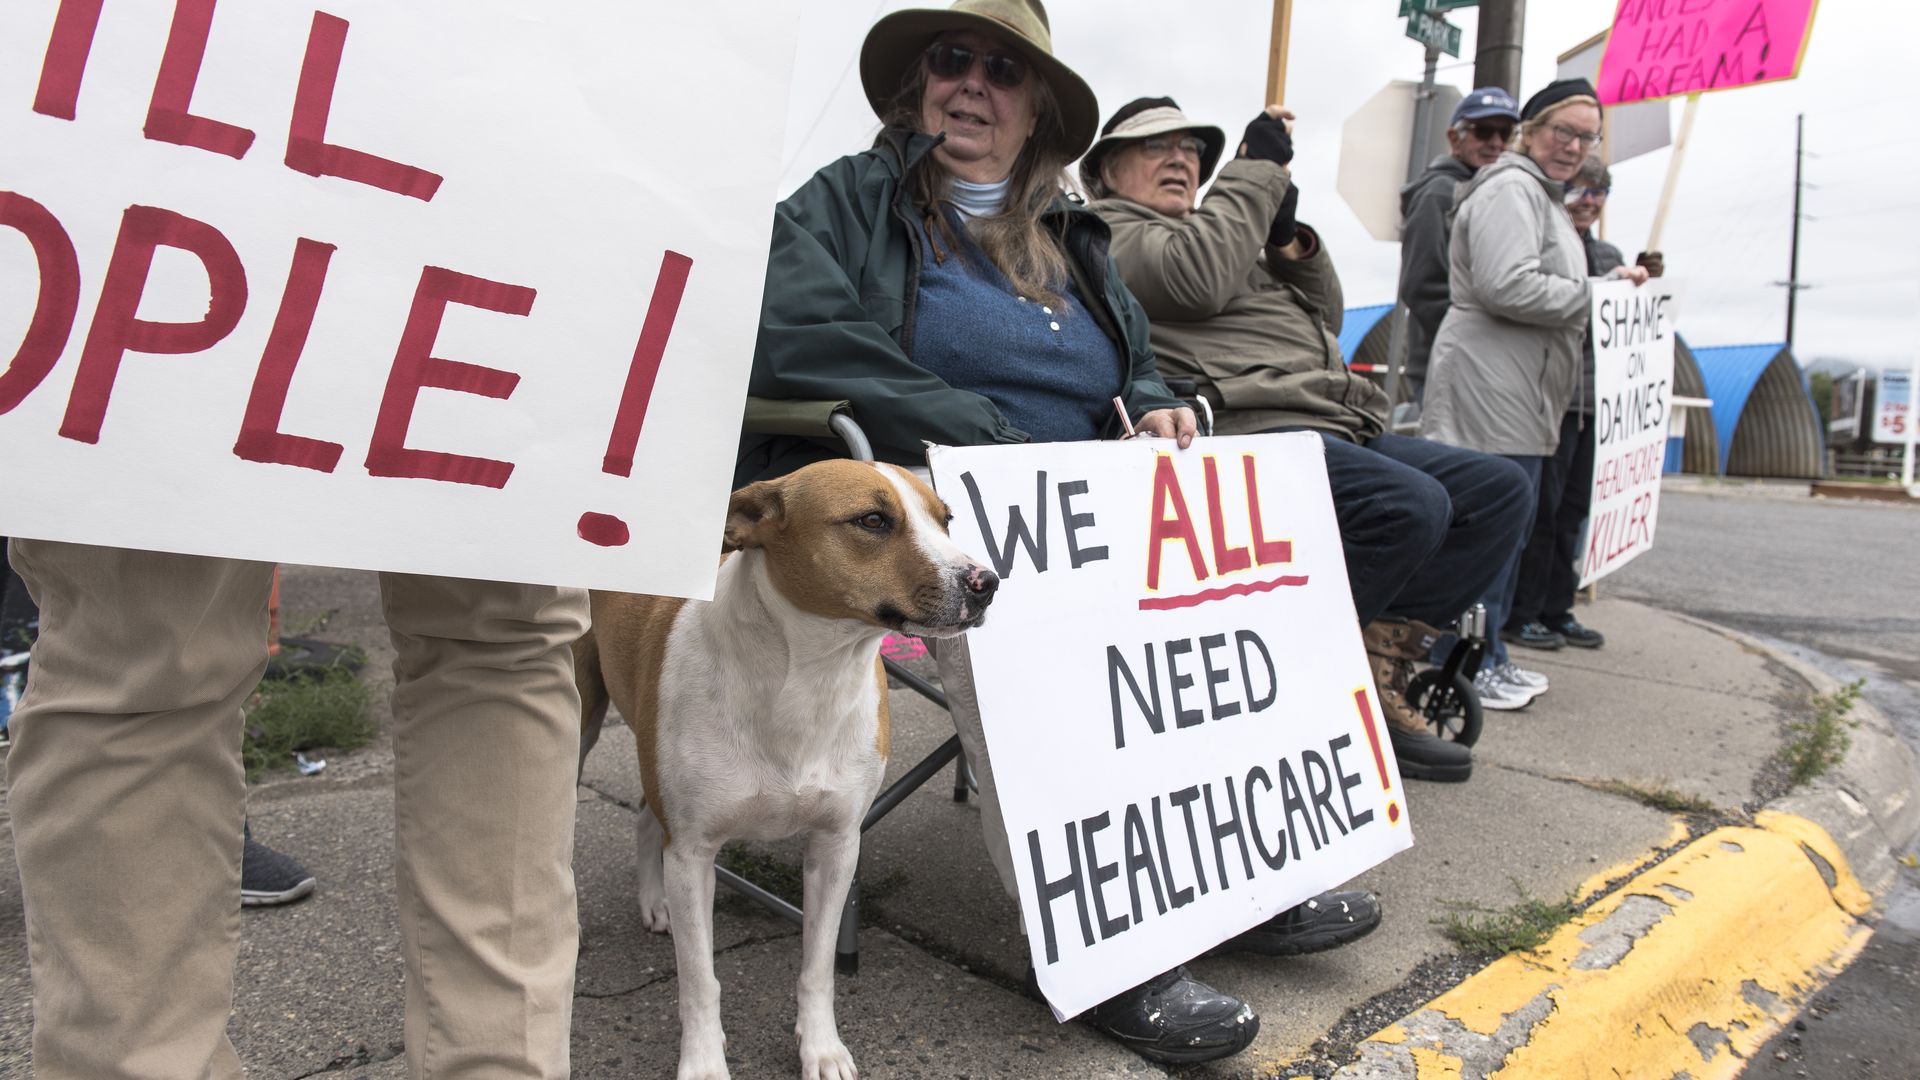 Protesters hold a small peaceful demonstration in support of health care